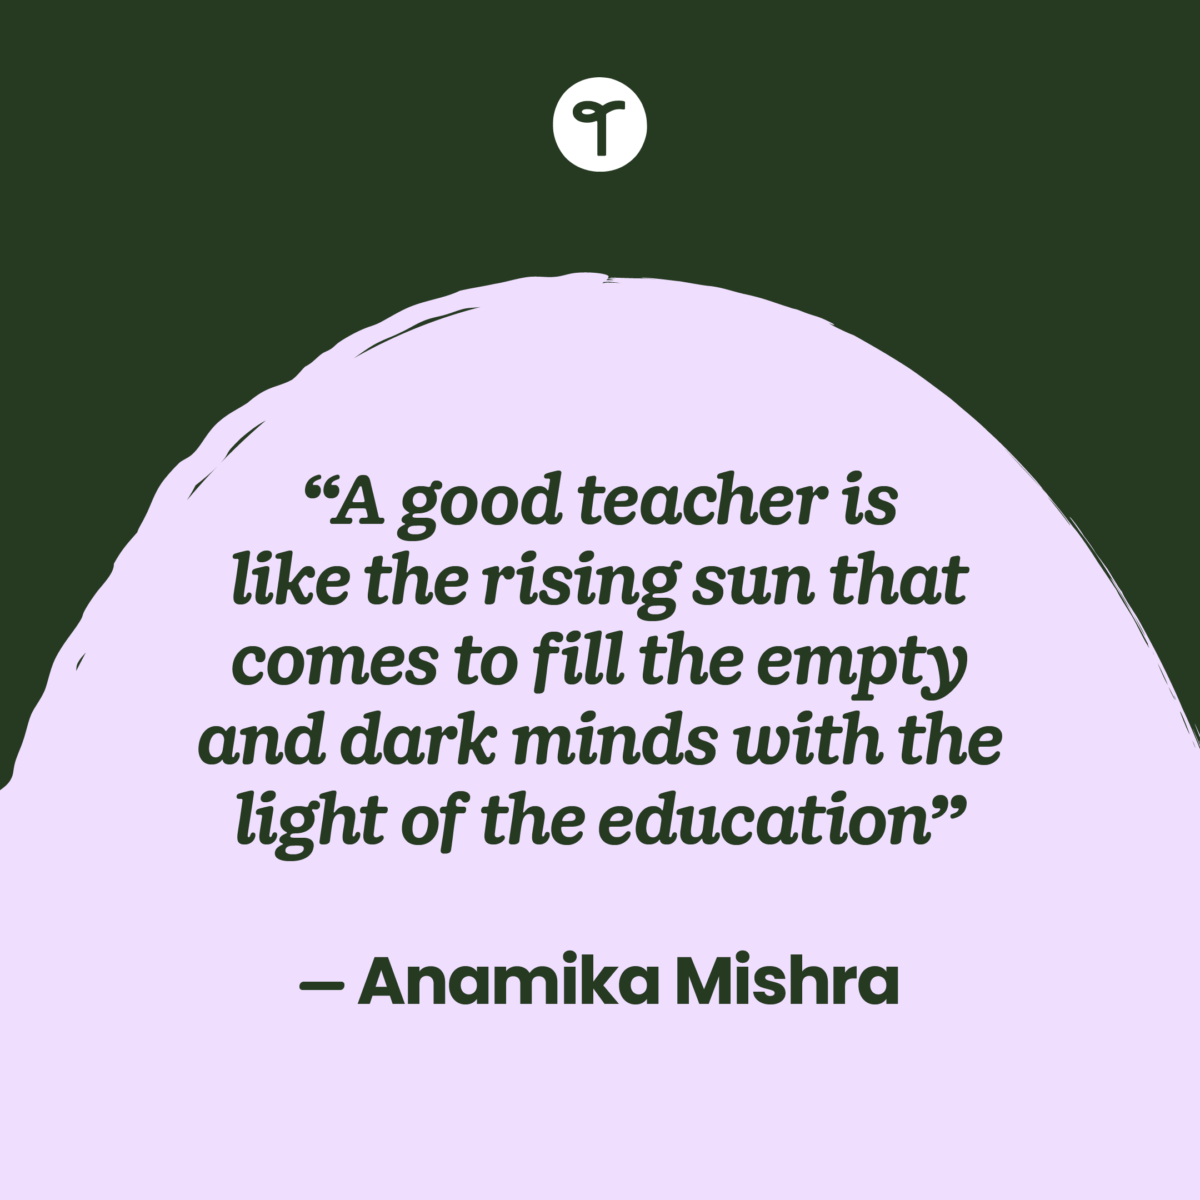 inspirational teacher quote “A good teacher is like the rising sun that comes to fill the empty and dark minds with the light of the education” ― Anamika Mishra